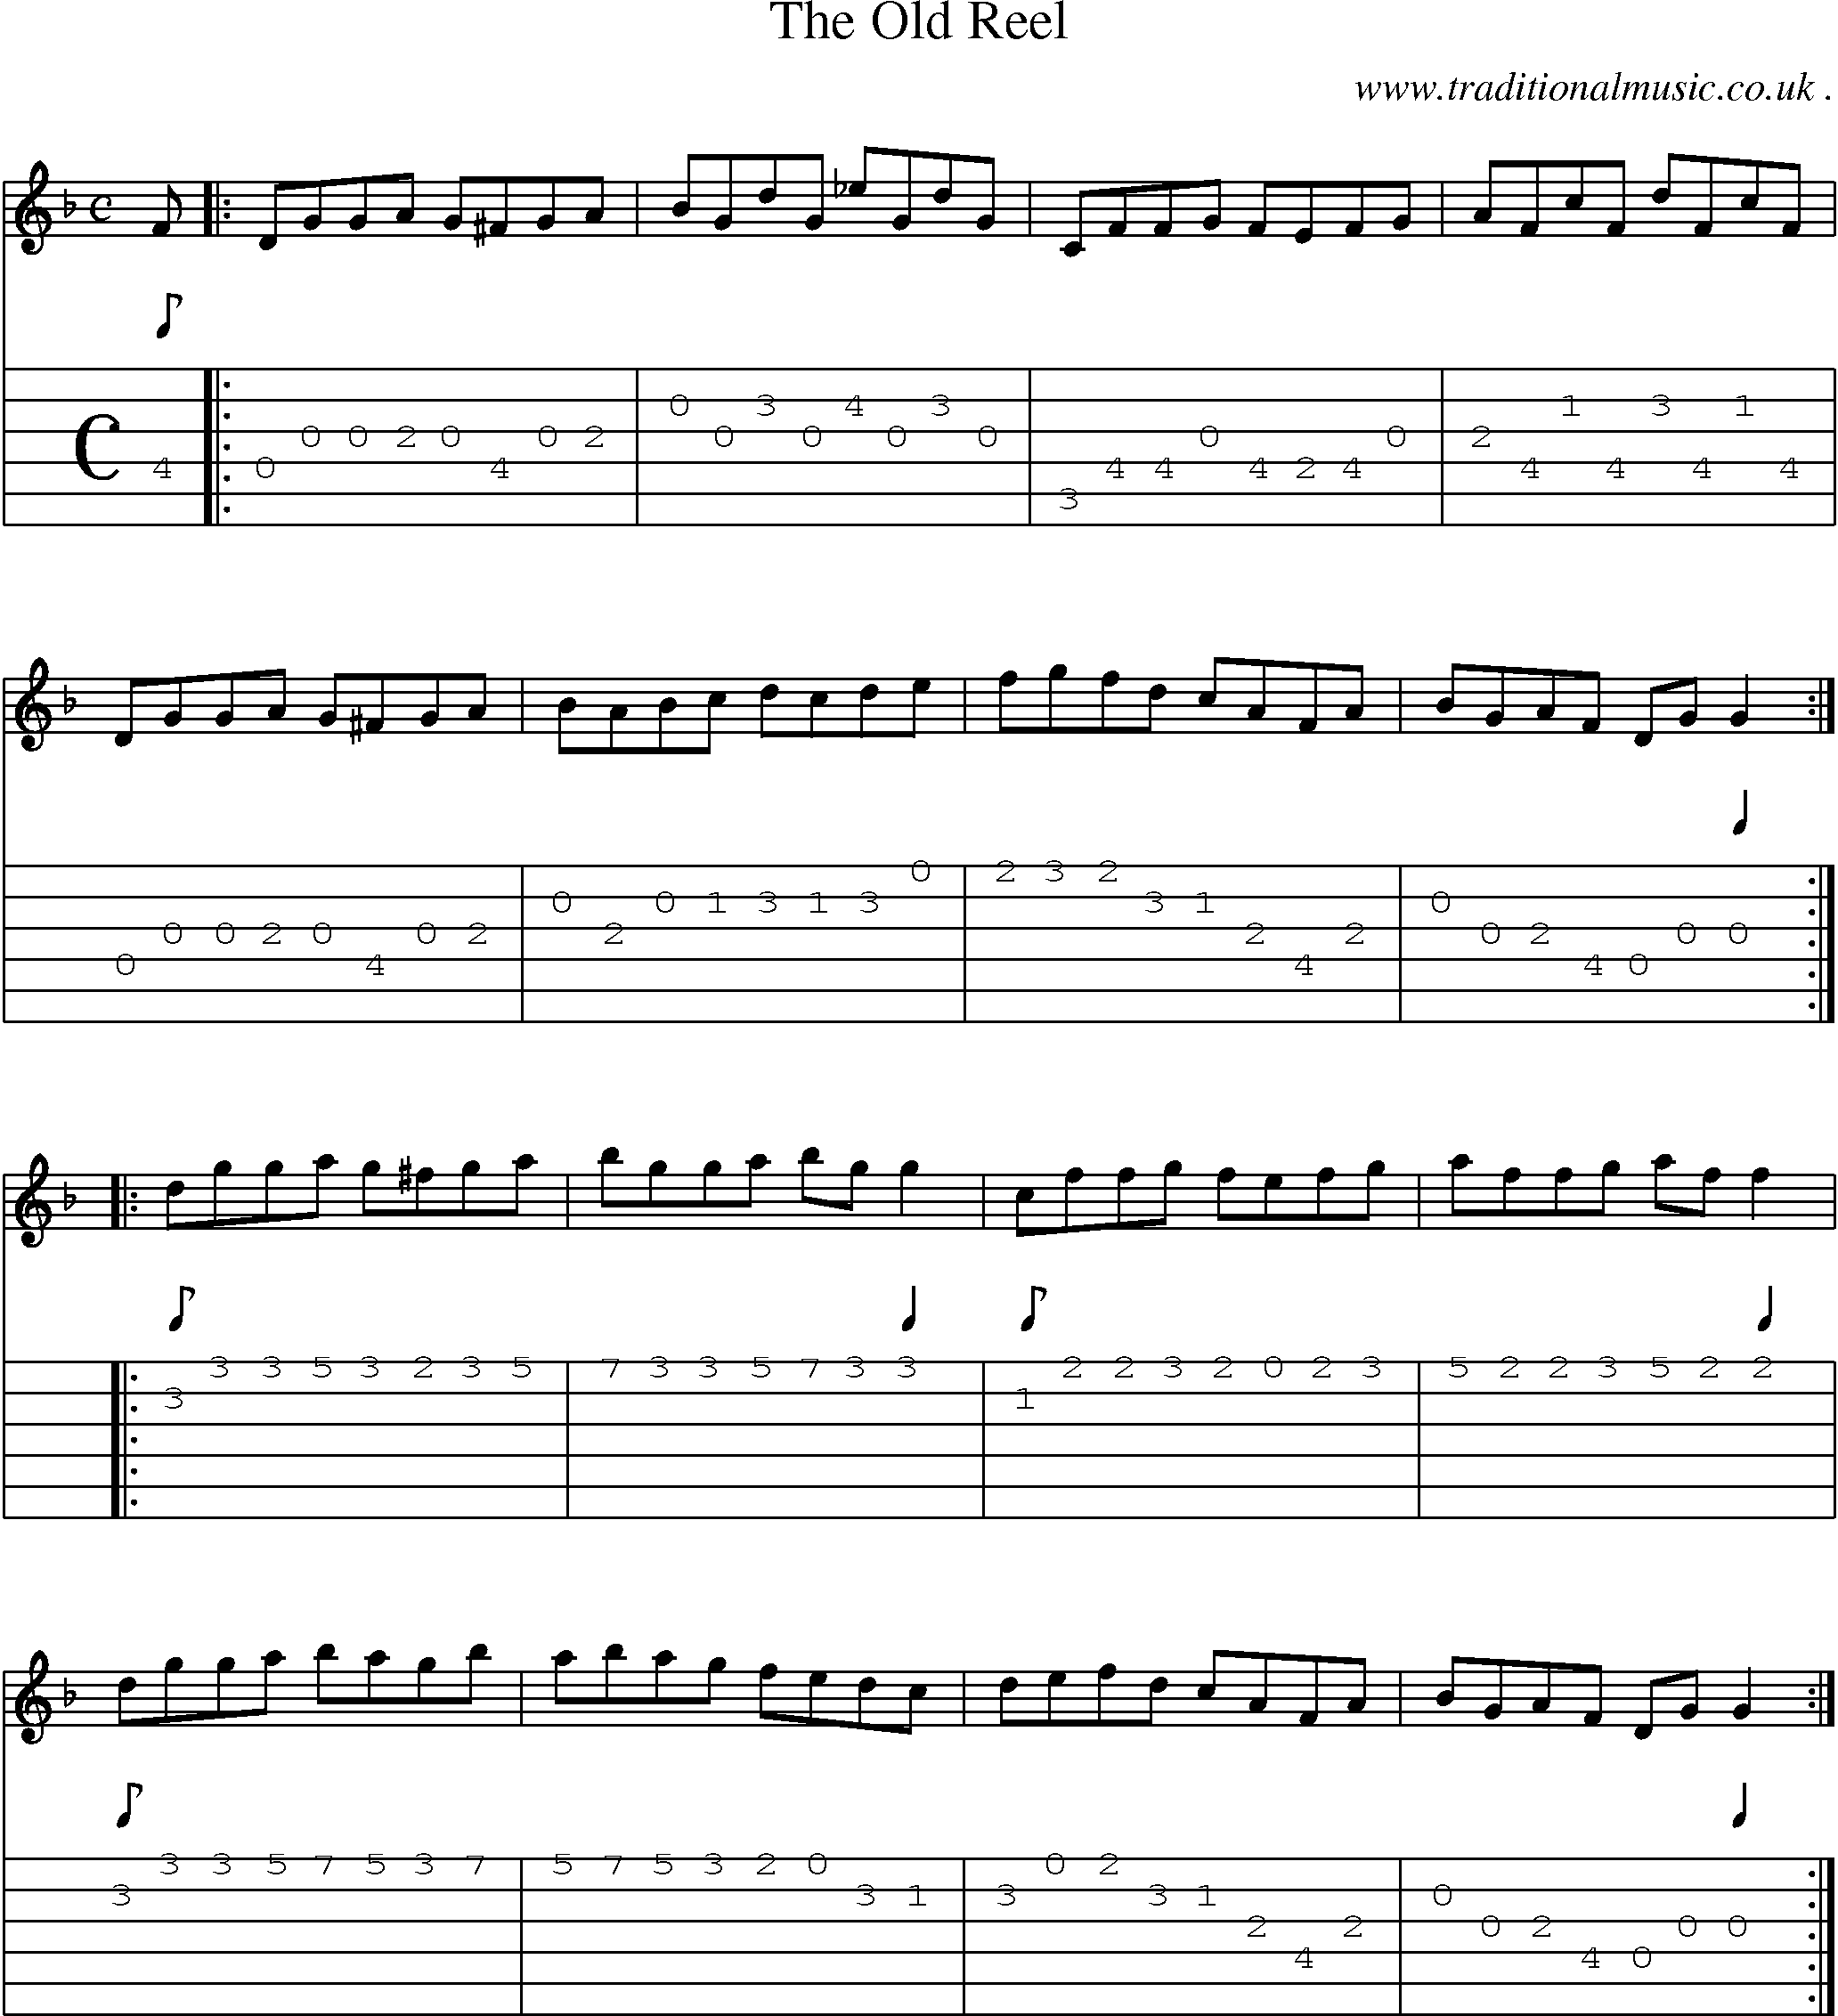 Sheet-Music and Guitar Tabs for The Old Reel